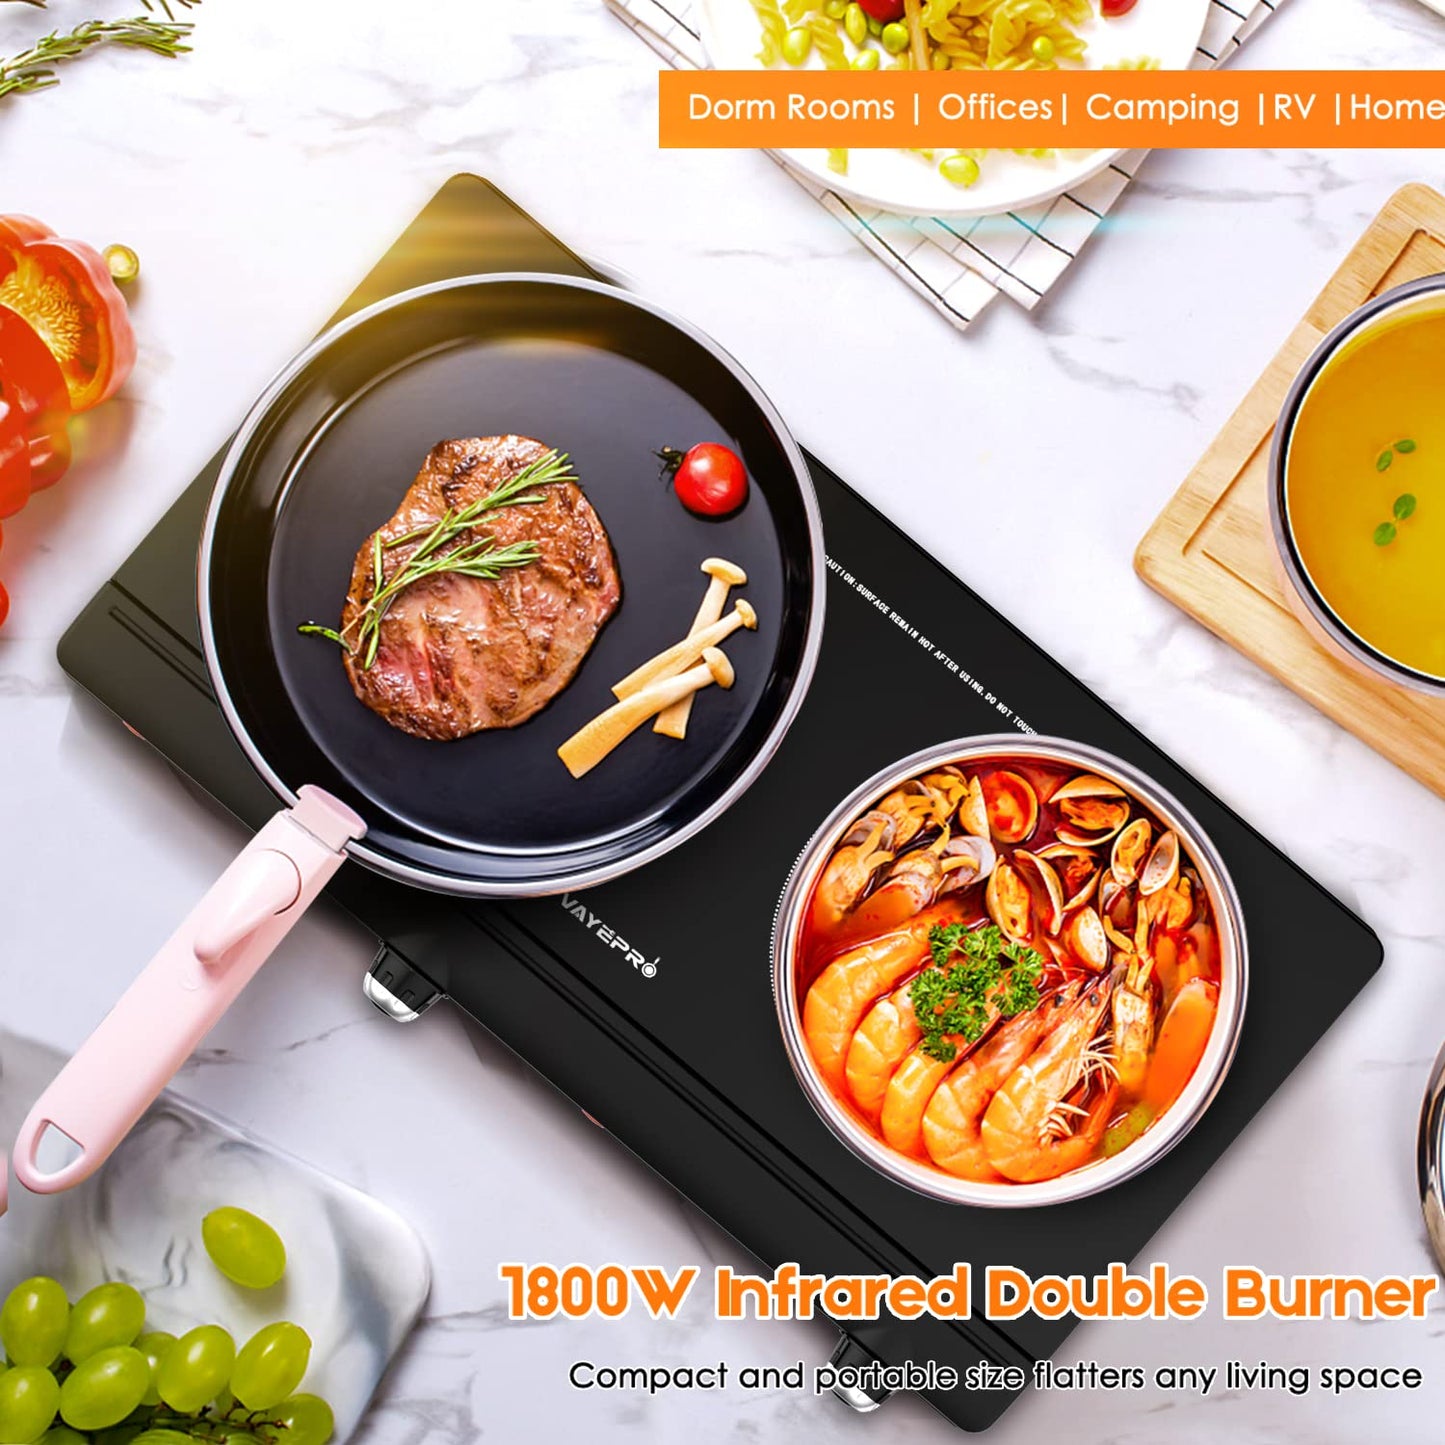 Electric Hot Plate for Cooking, Infrared Double Burner,1800W Portable Electric Stove,Heat-up In Seconds,Countertop Cooktop for Dorm Office Home Camp